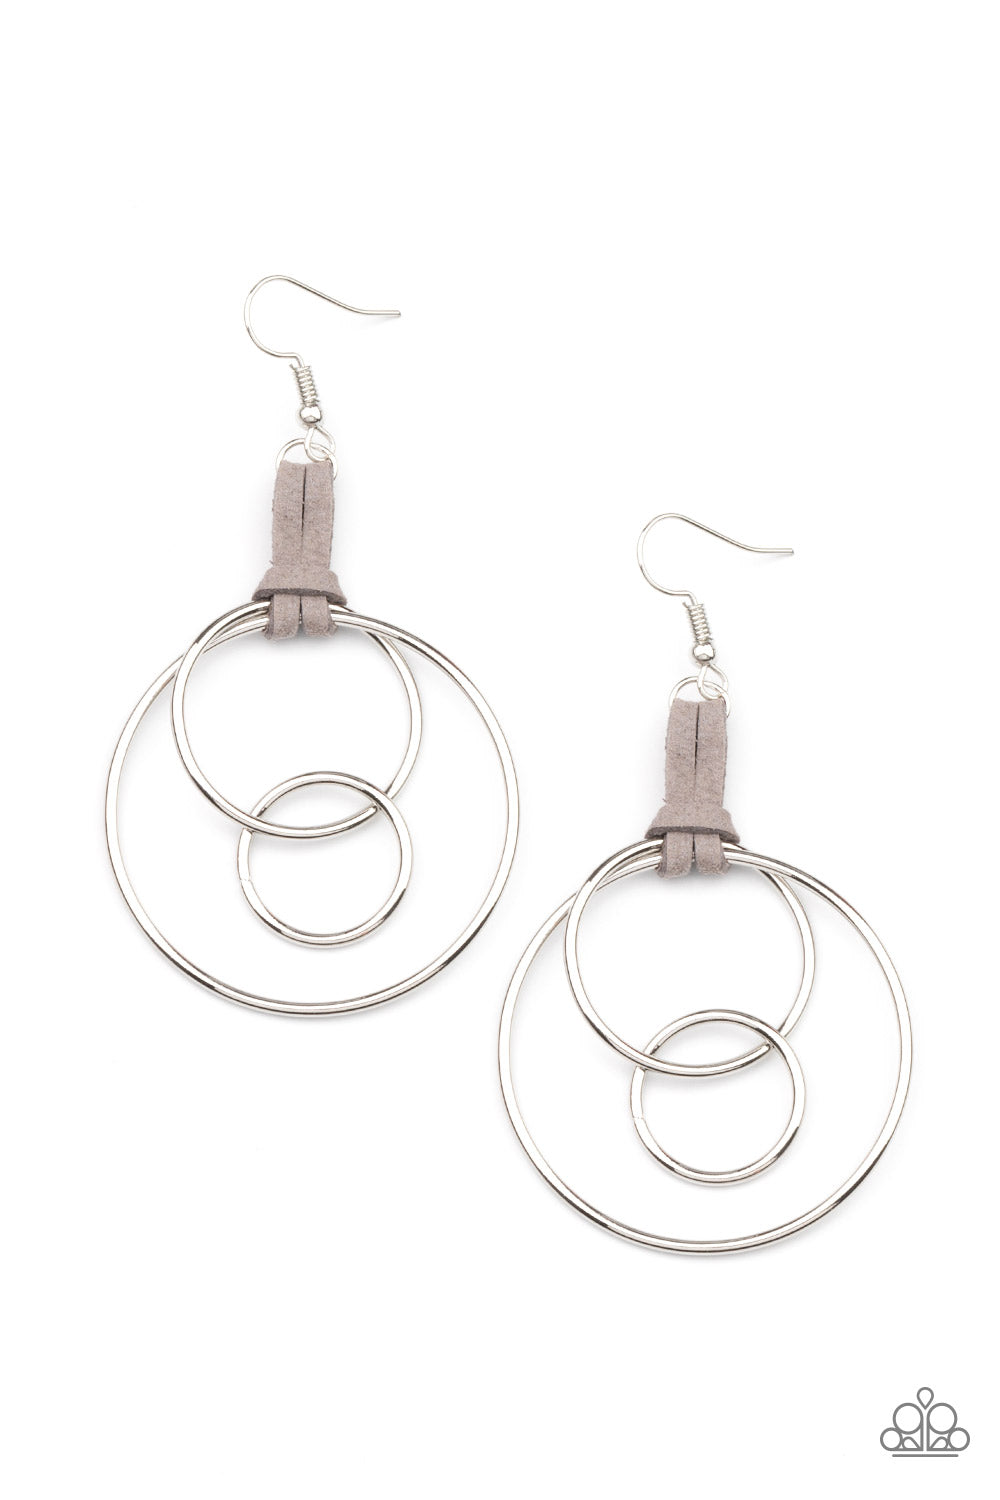 Fearless Fusion - Silver Earrings - Princess Glam Shop